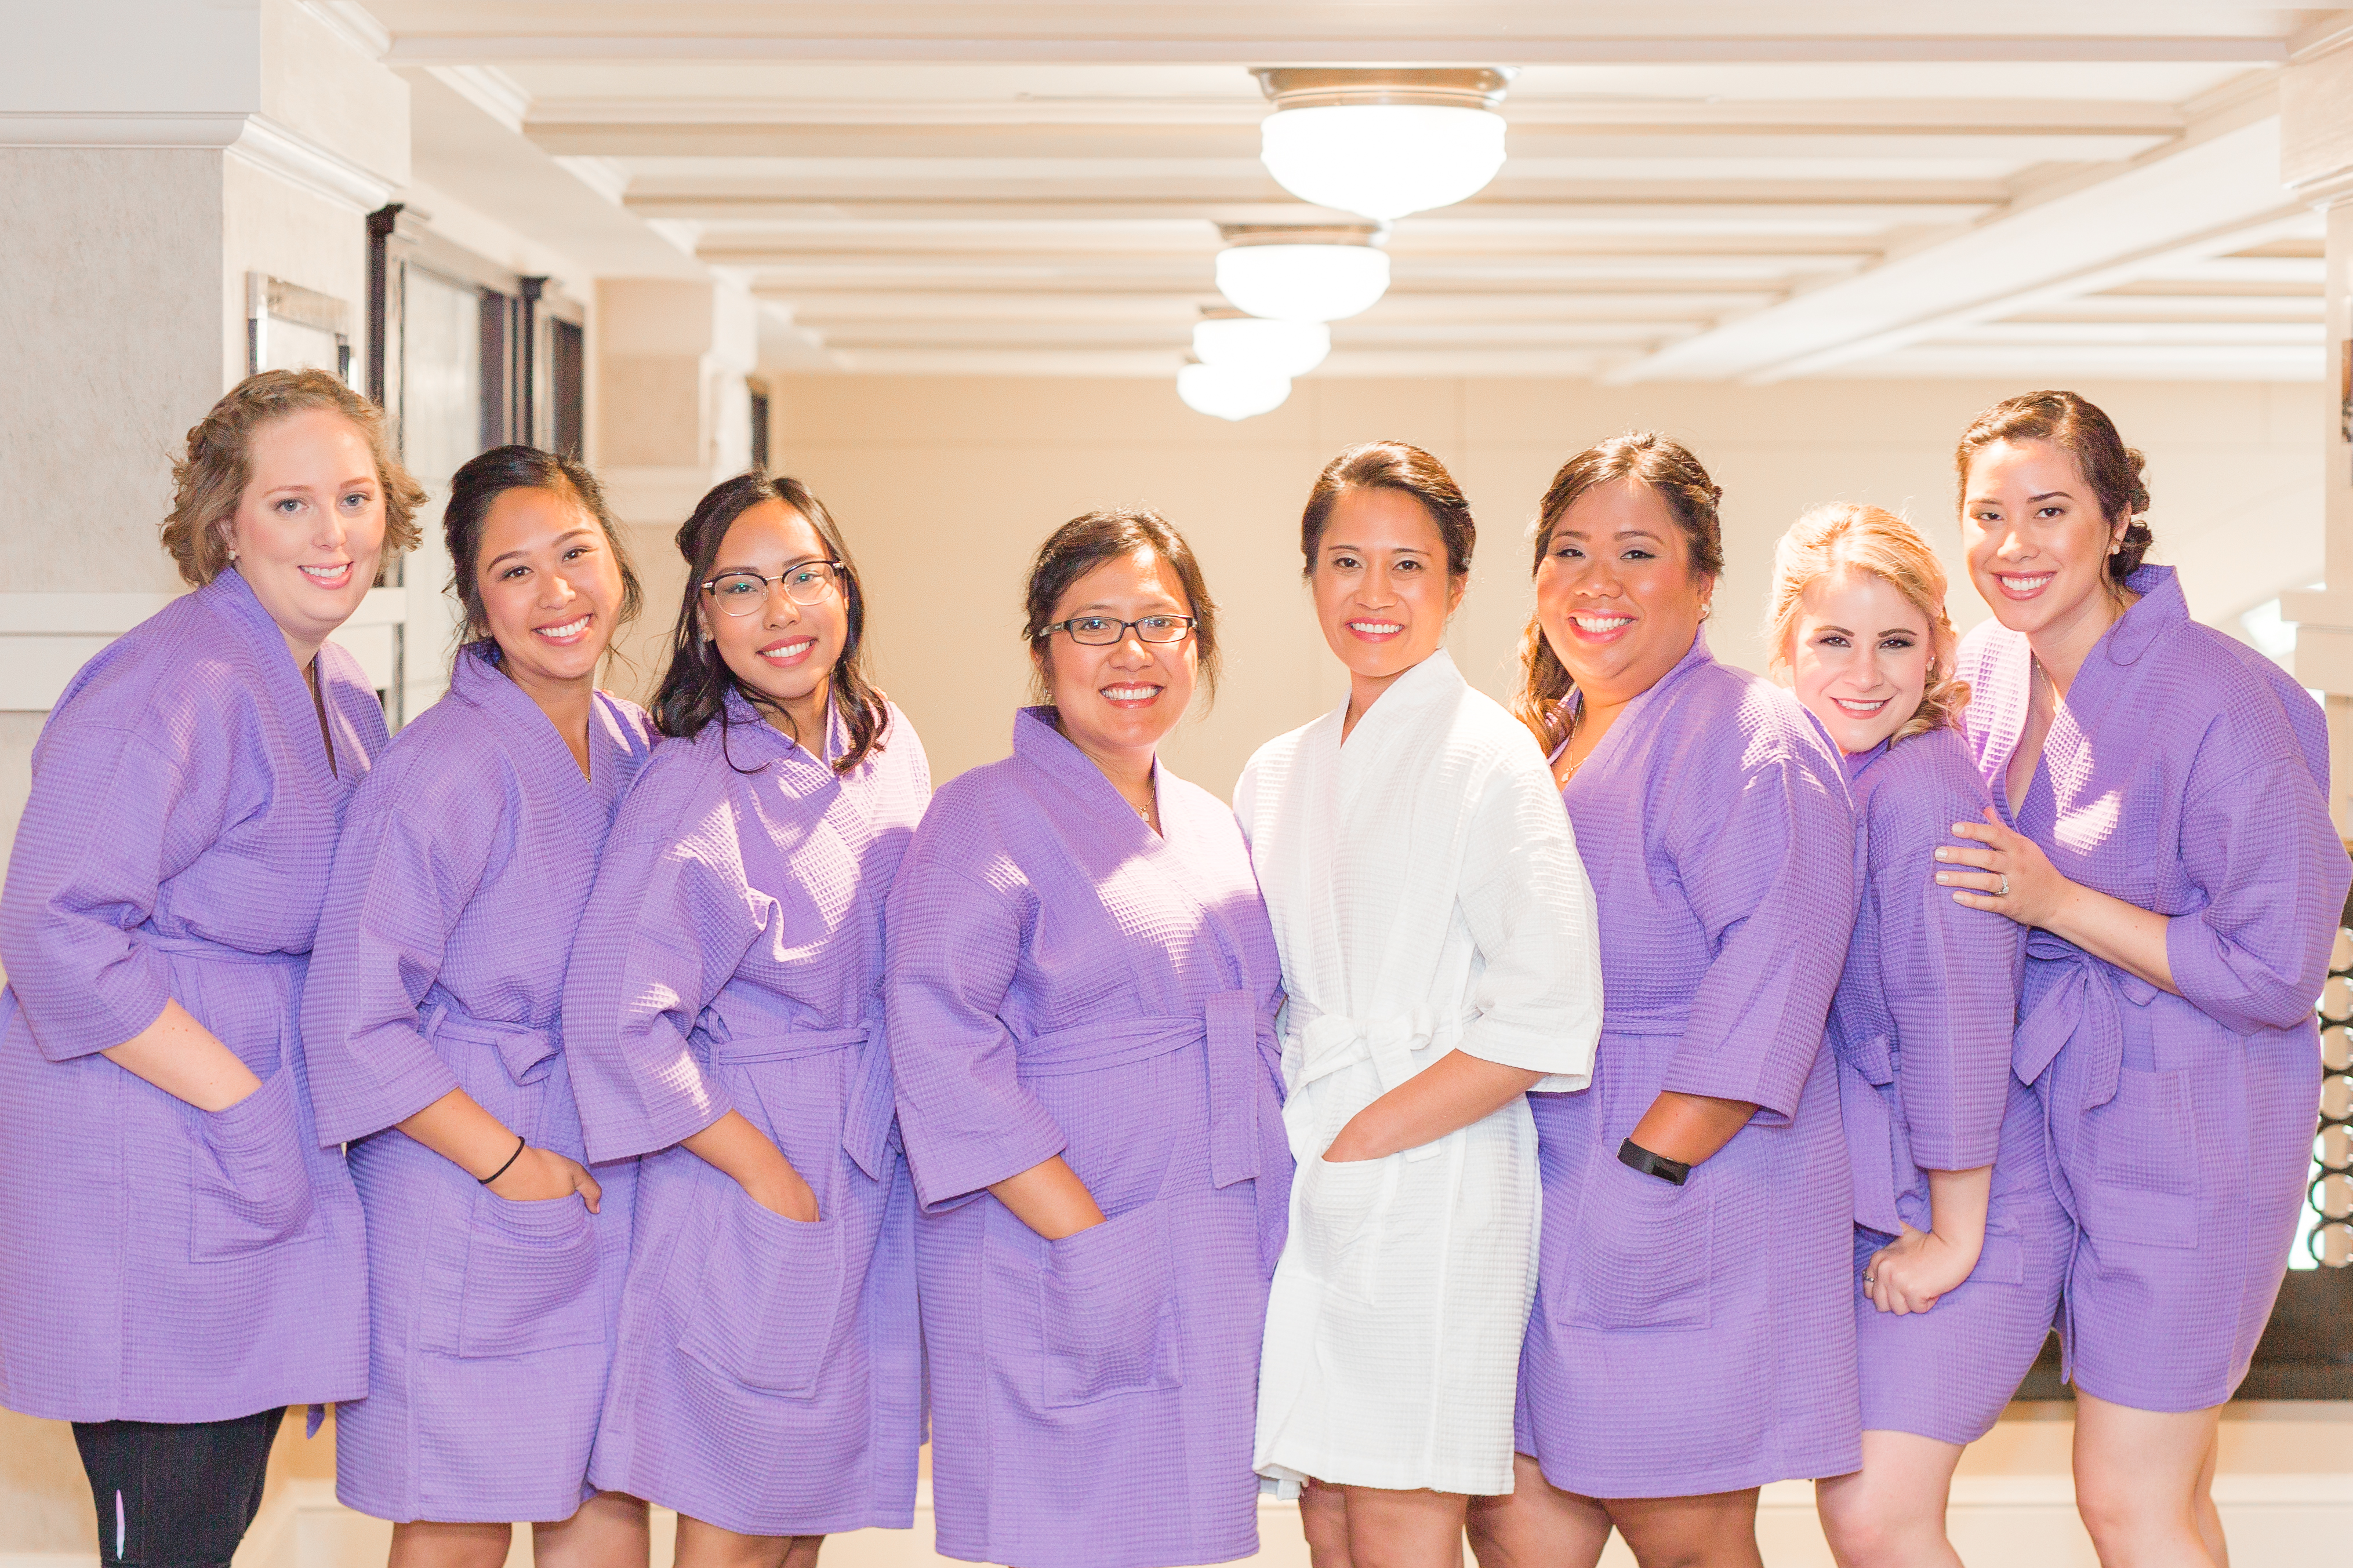 the bride and her bridesmaids in their purple getting ready robes